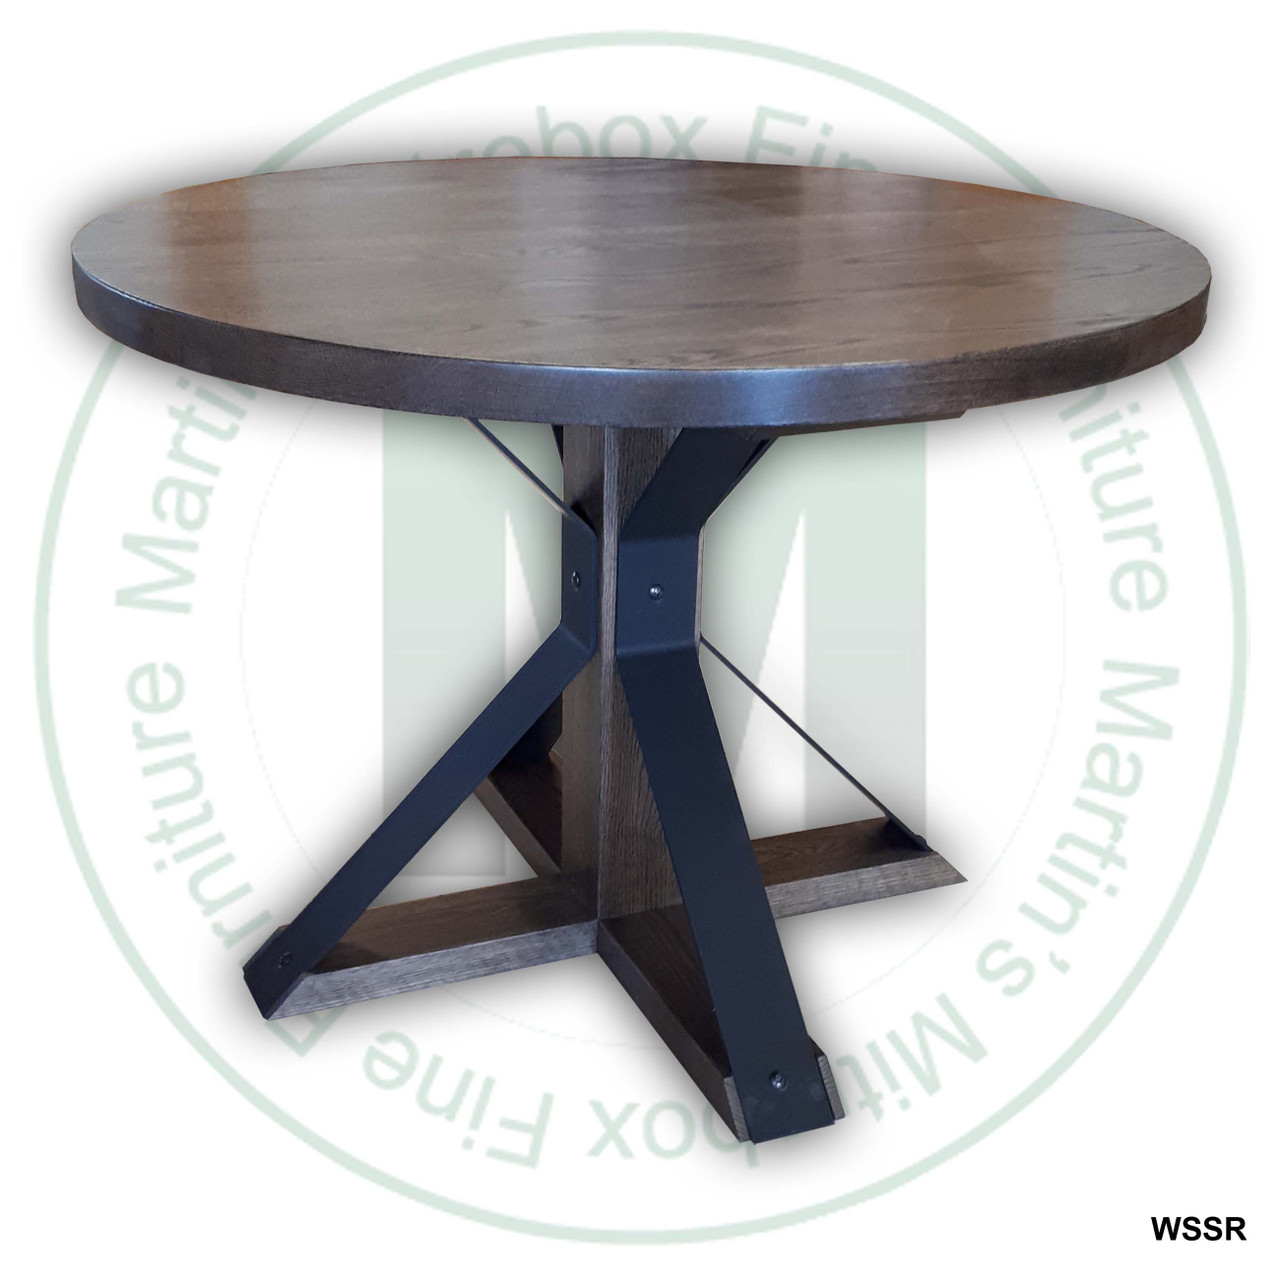 Wormy Maple Hyde Single Pedestal Table 60''D x 60''W x 30''H Round Solid Table. Table Has 1.75'' Thick Top.